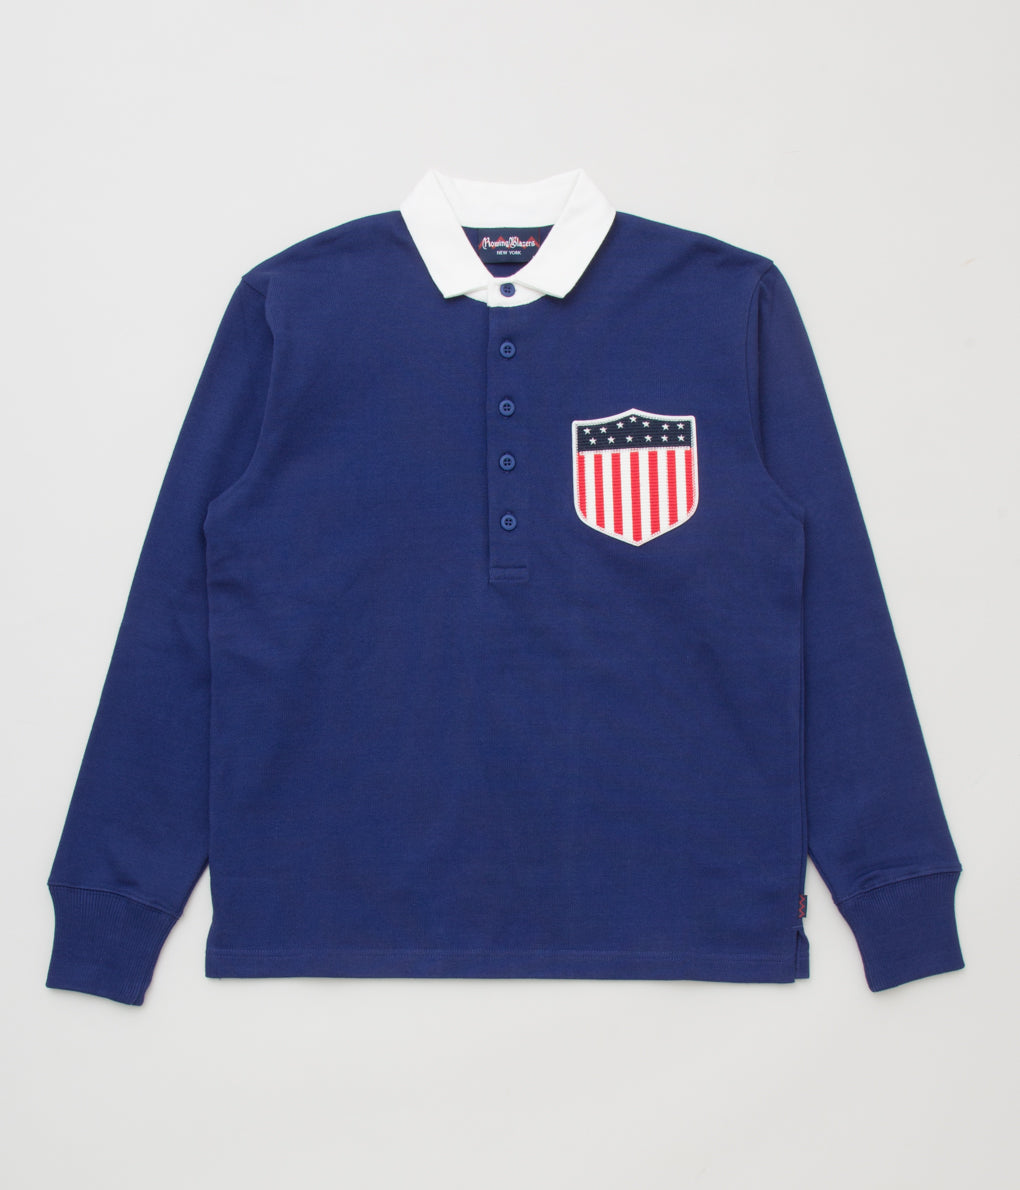 ROWING BLAZERS "USA RUGBY"(BLUE)